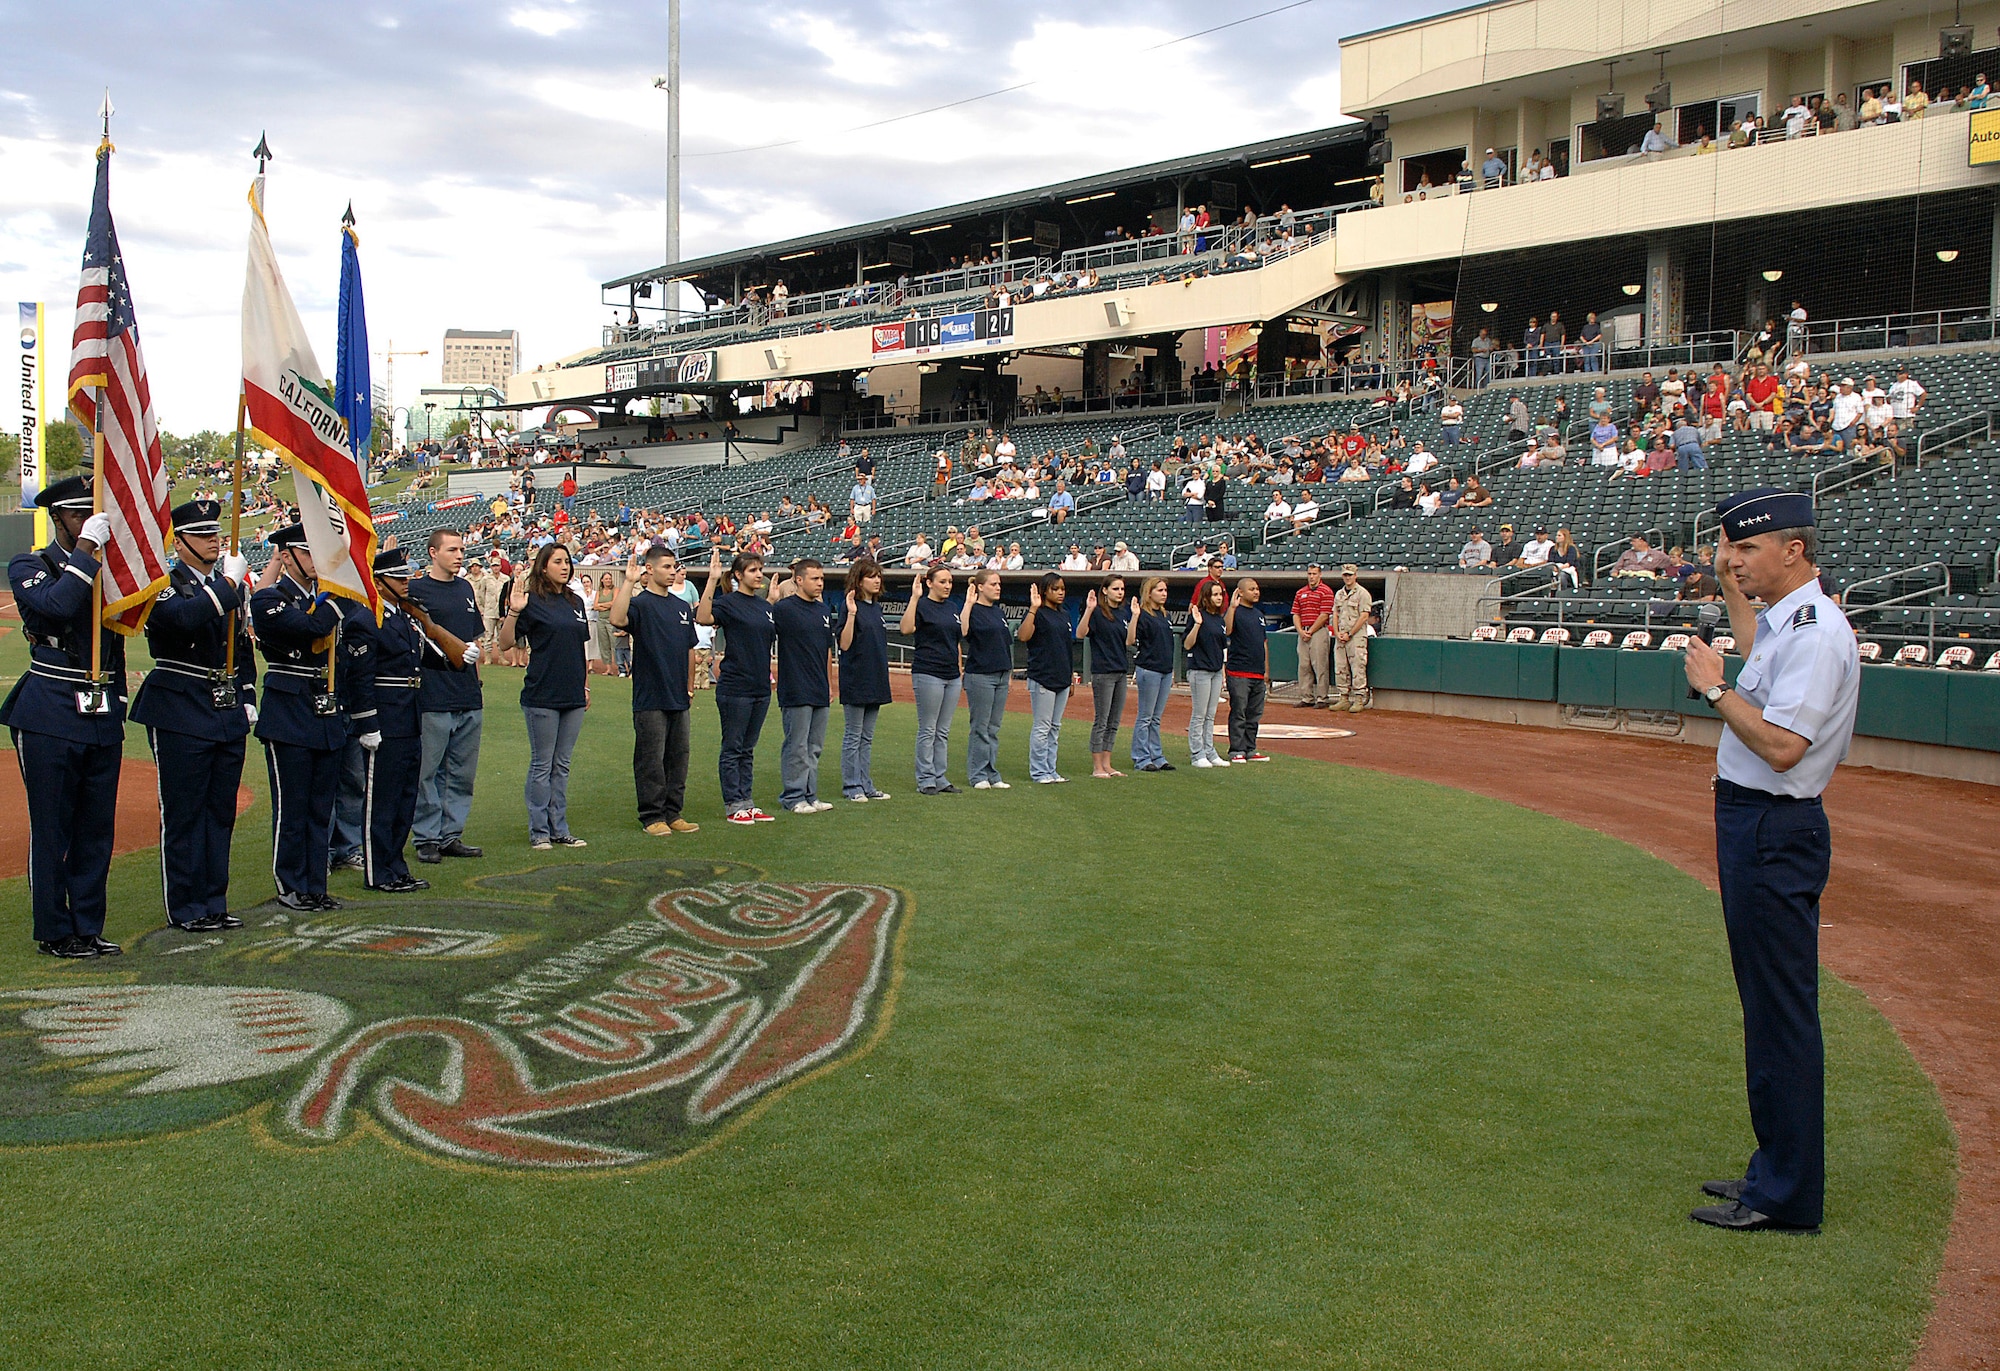 Gen. Kevin P. Chilton enlists several teenagers into the delayed enlistment program before a local minor league baseball game June 4 during Air Force Week in California. The purpose of Air Force Week is to inform and educate the American public about the importance and roles of the Air Force in America's national defense. General Chilton is the commander of the Air Force Space Command at Peterson Air Force Base, Colo. (U.S. Air Force photo/Tech. Sgt. Larry A. Simmons)
